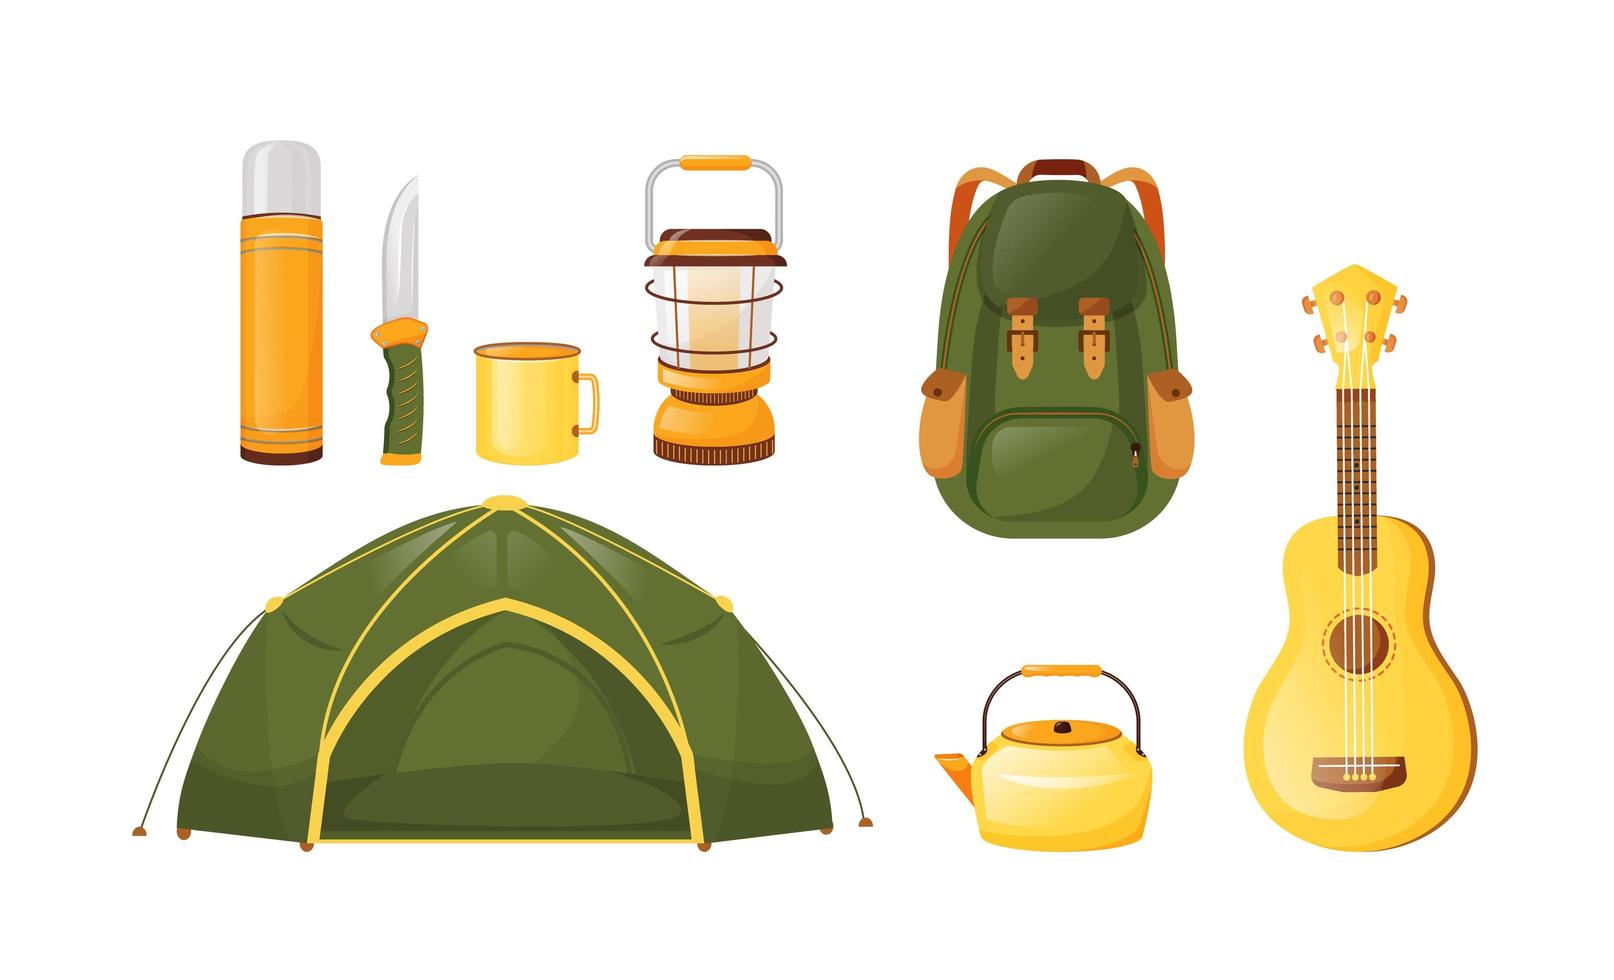 Camping equipment flat color vector objects set